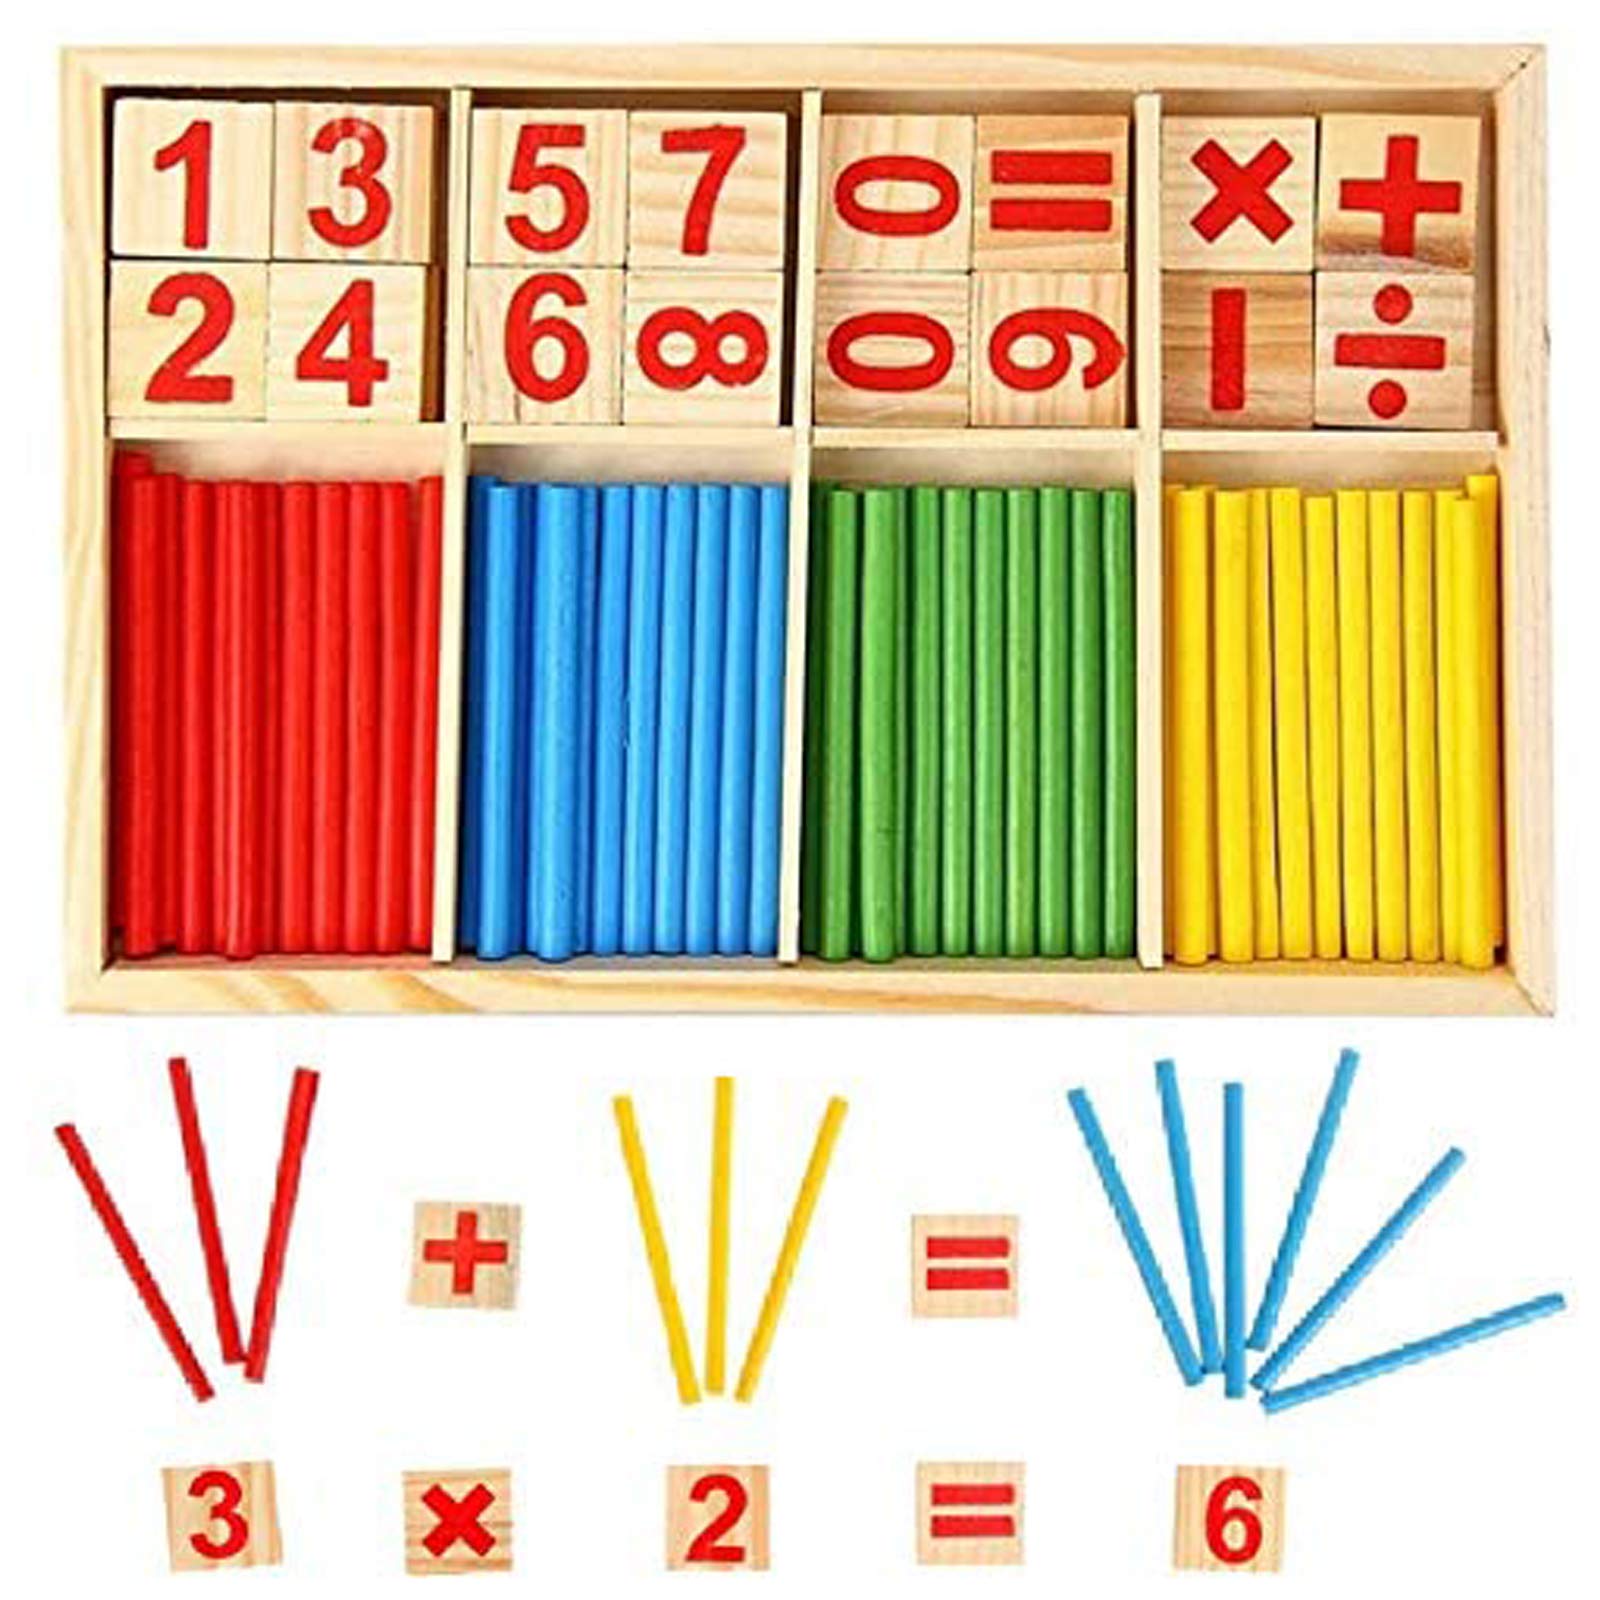 KUTOI Counting Number Blocks and Sticks | Montessori Toys for Kids Learning| Homeschool Supplies for Math manipulatives | Toddle